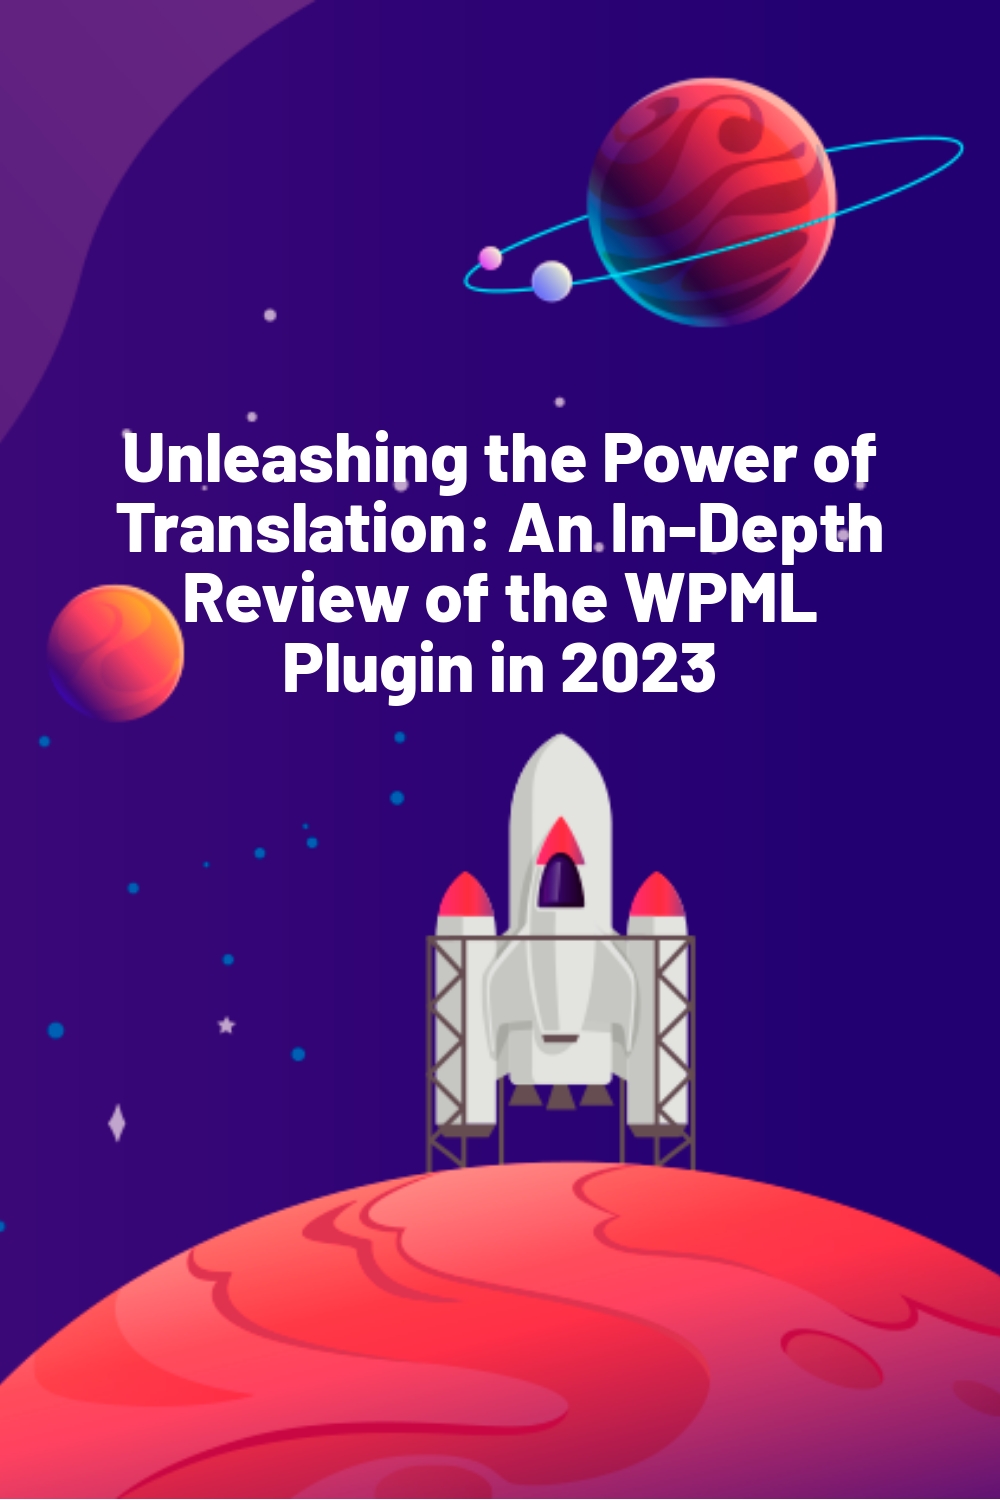 Unleashing the Power of Translation: An In-Depth Review of the WPML Plugin in 2023